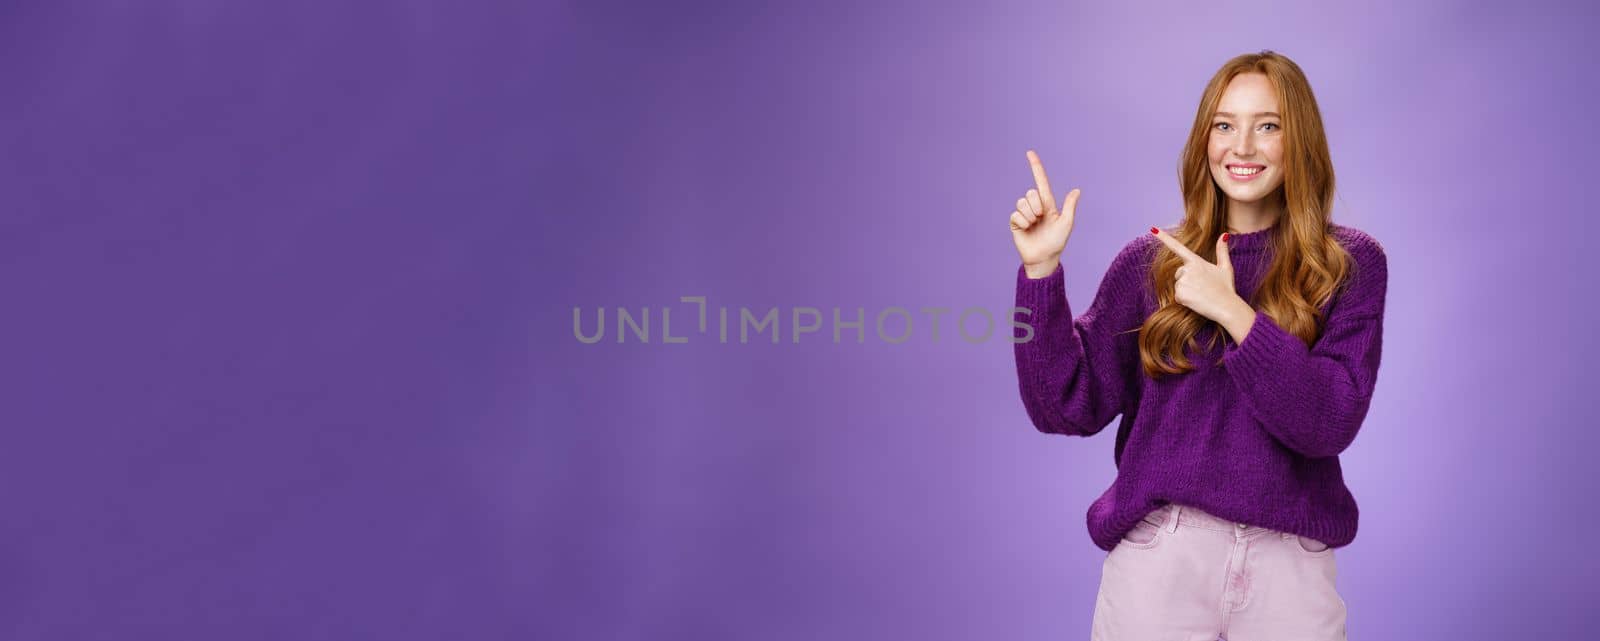 Lifestyle. Charming assertive female shop assistant pointing at upper left corner to promote cool product smiling broadly feeling joyful and excited expressing friendly attitude as posing in purple sweater.